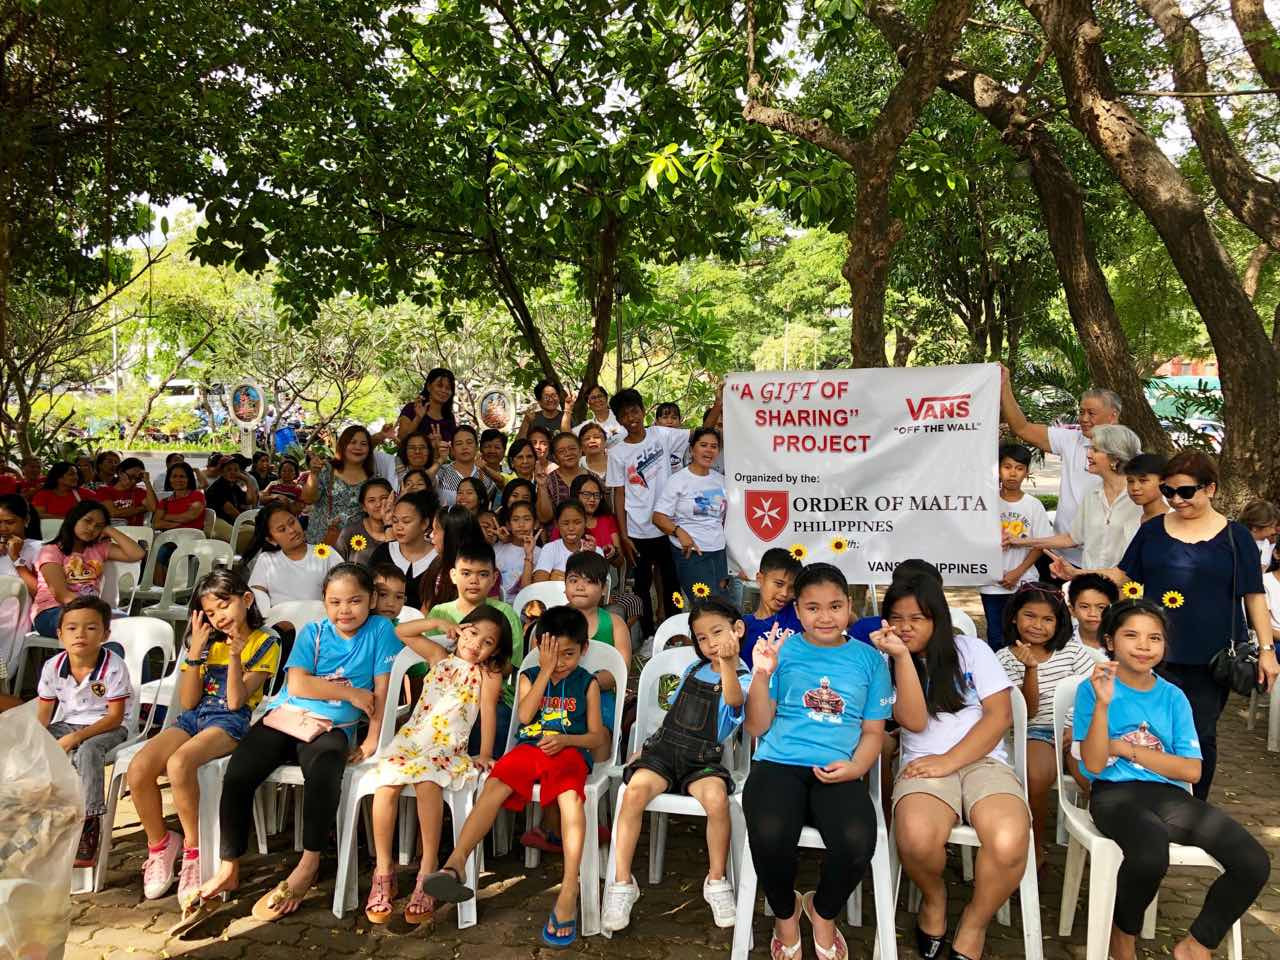 New project provides shoes to 15,000 disadvantaged adults and children in the Philippines